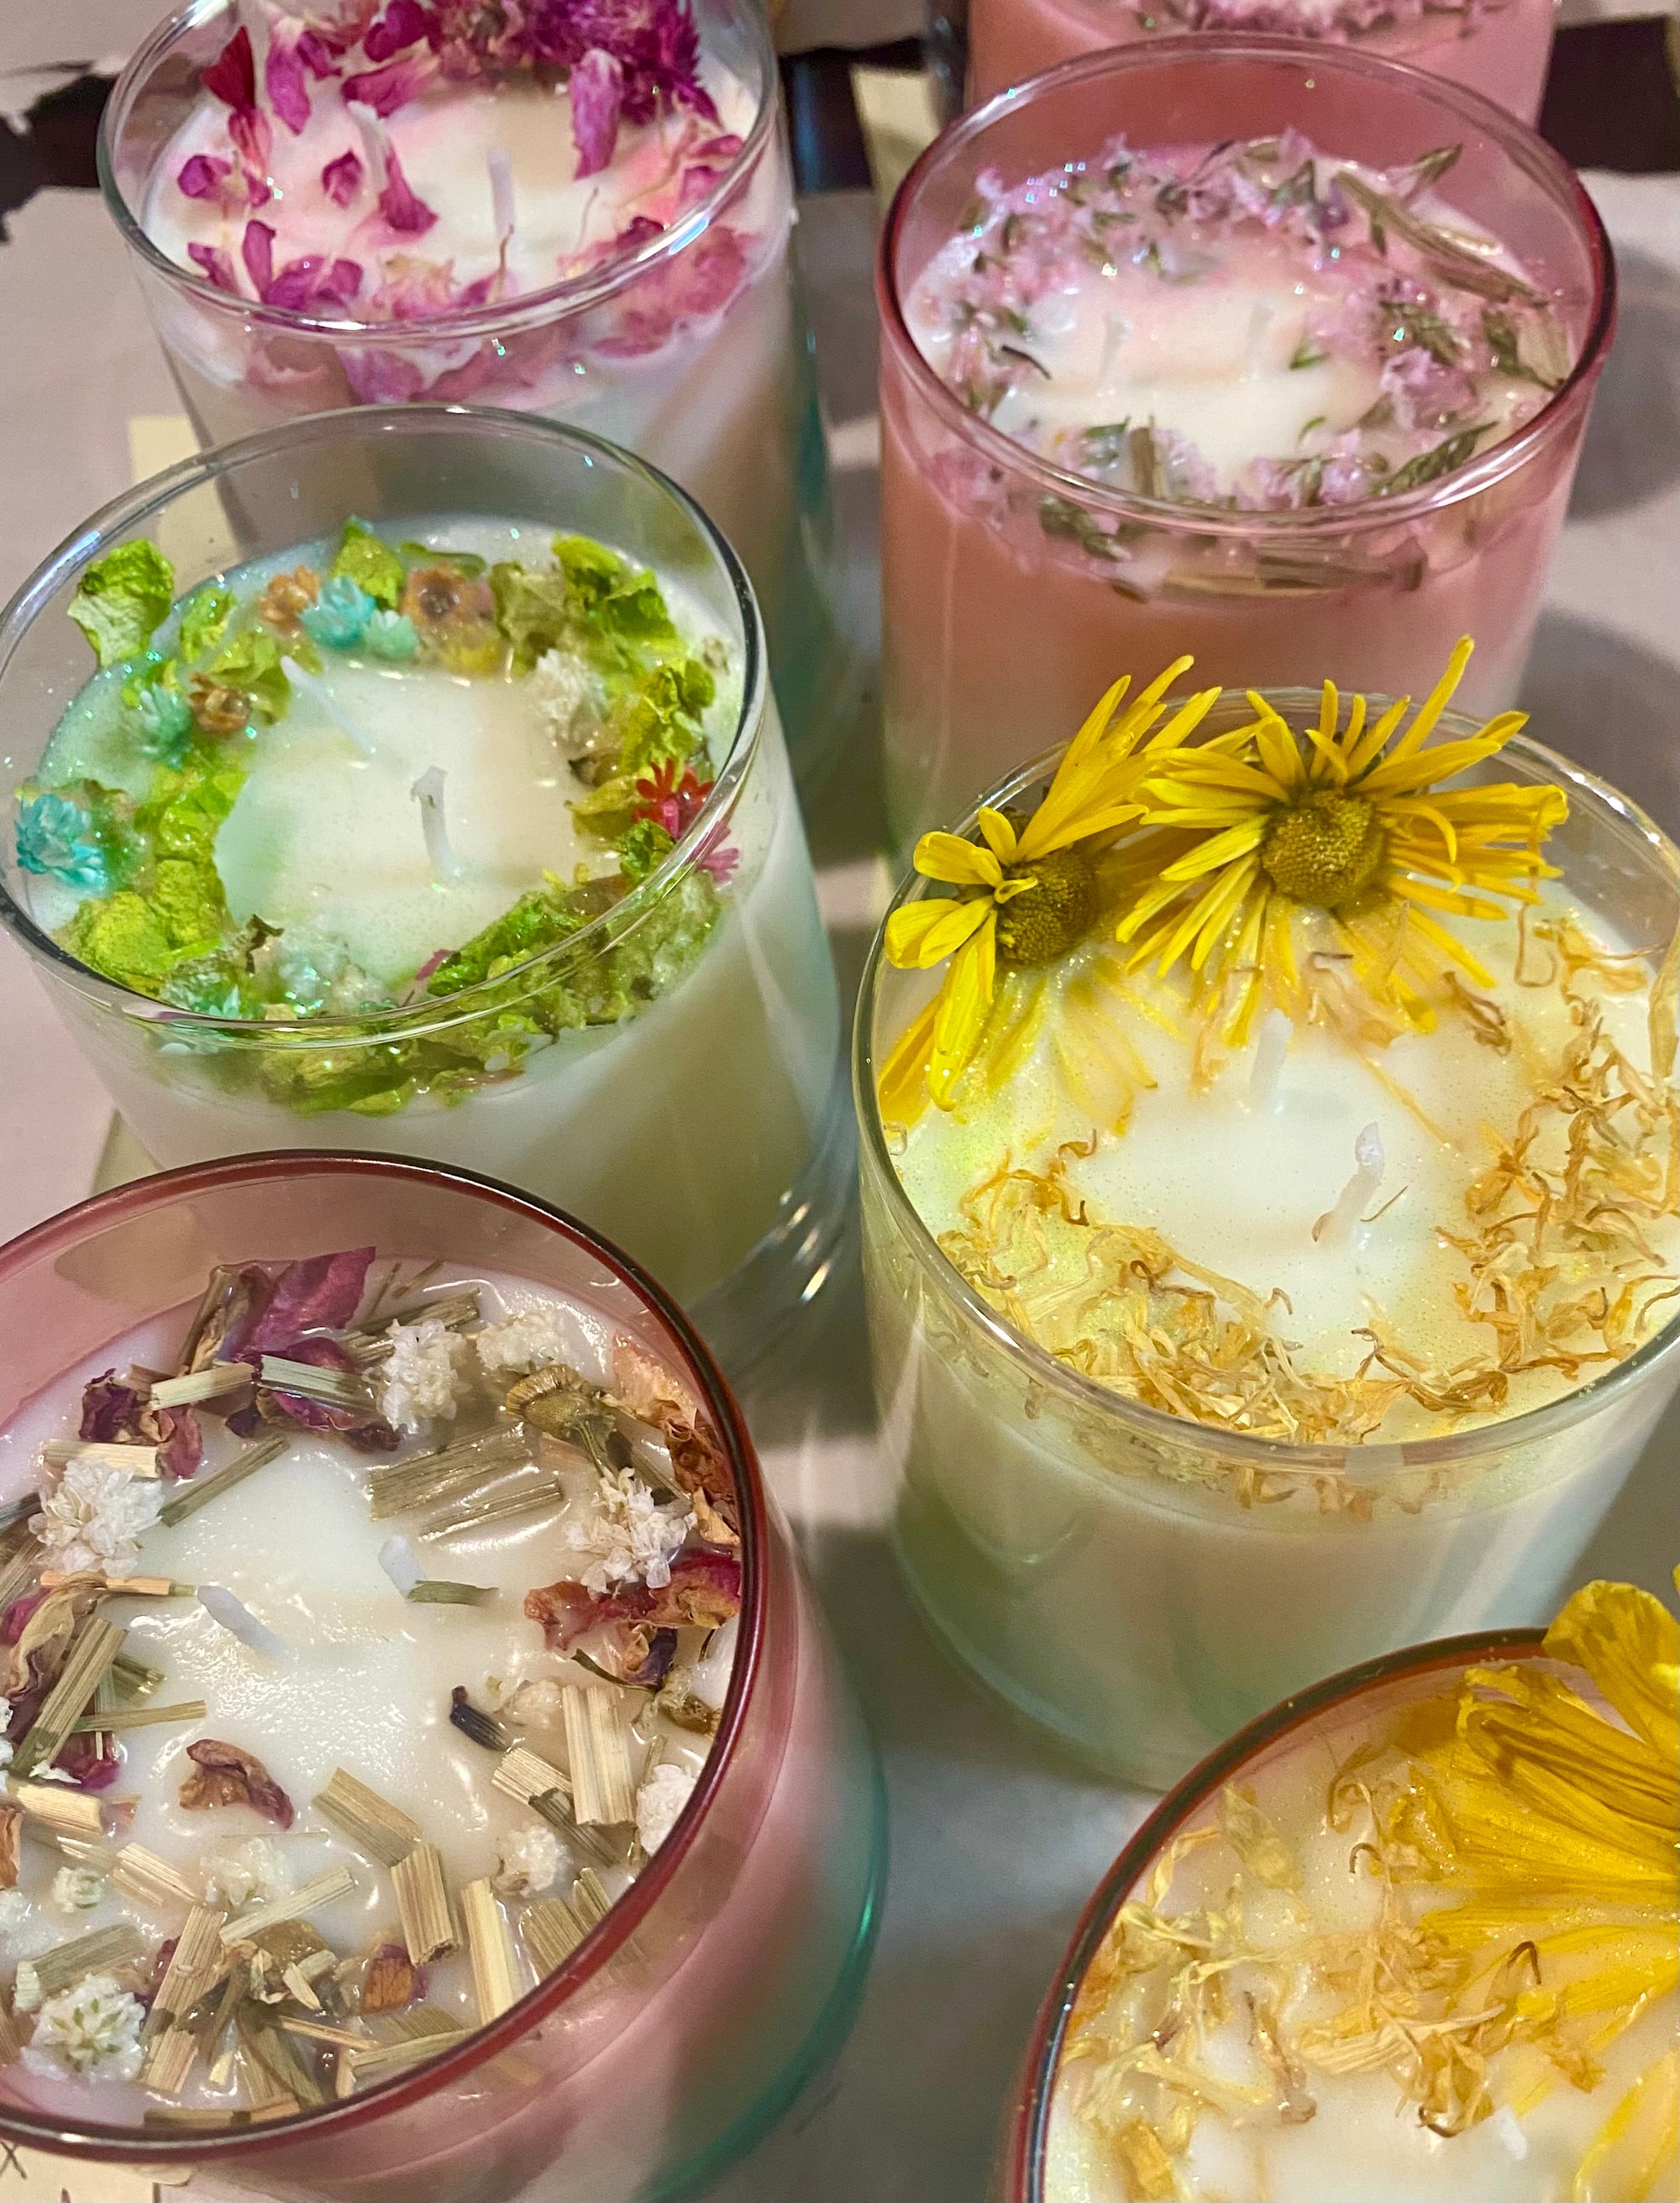 Floral Topped Soy Candles — Sungrove Blossoms - Rochester, NY Florist